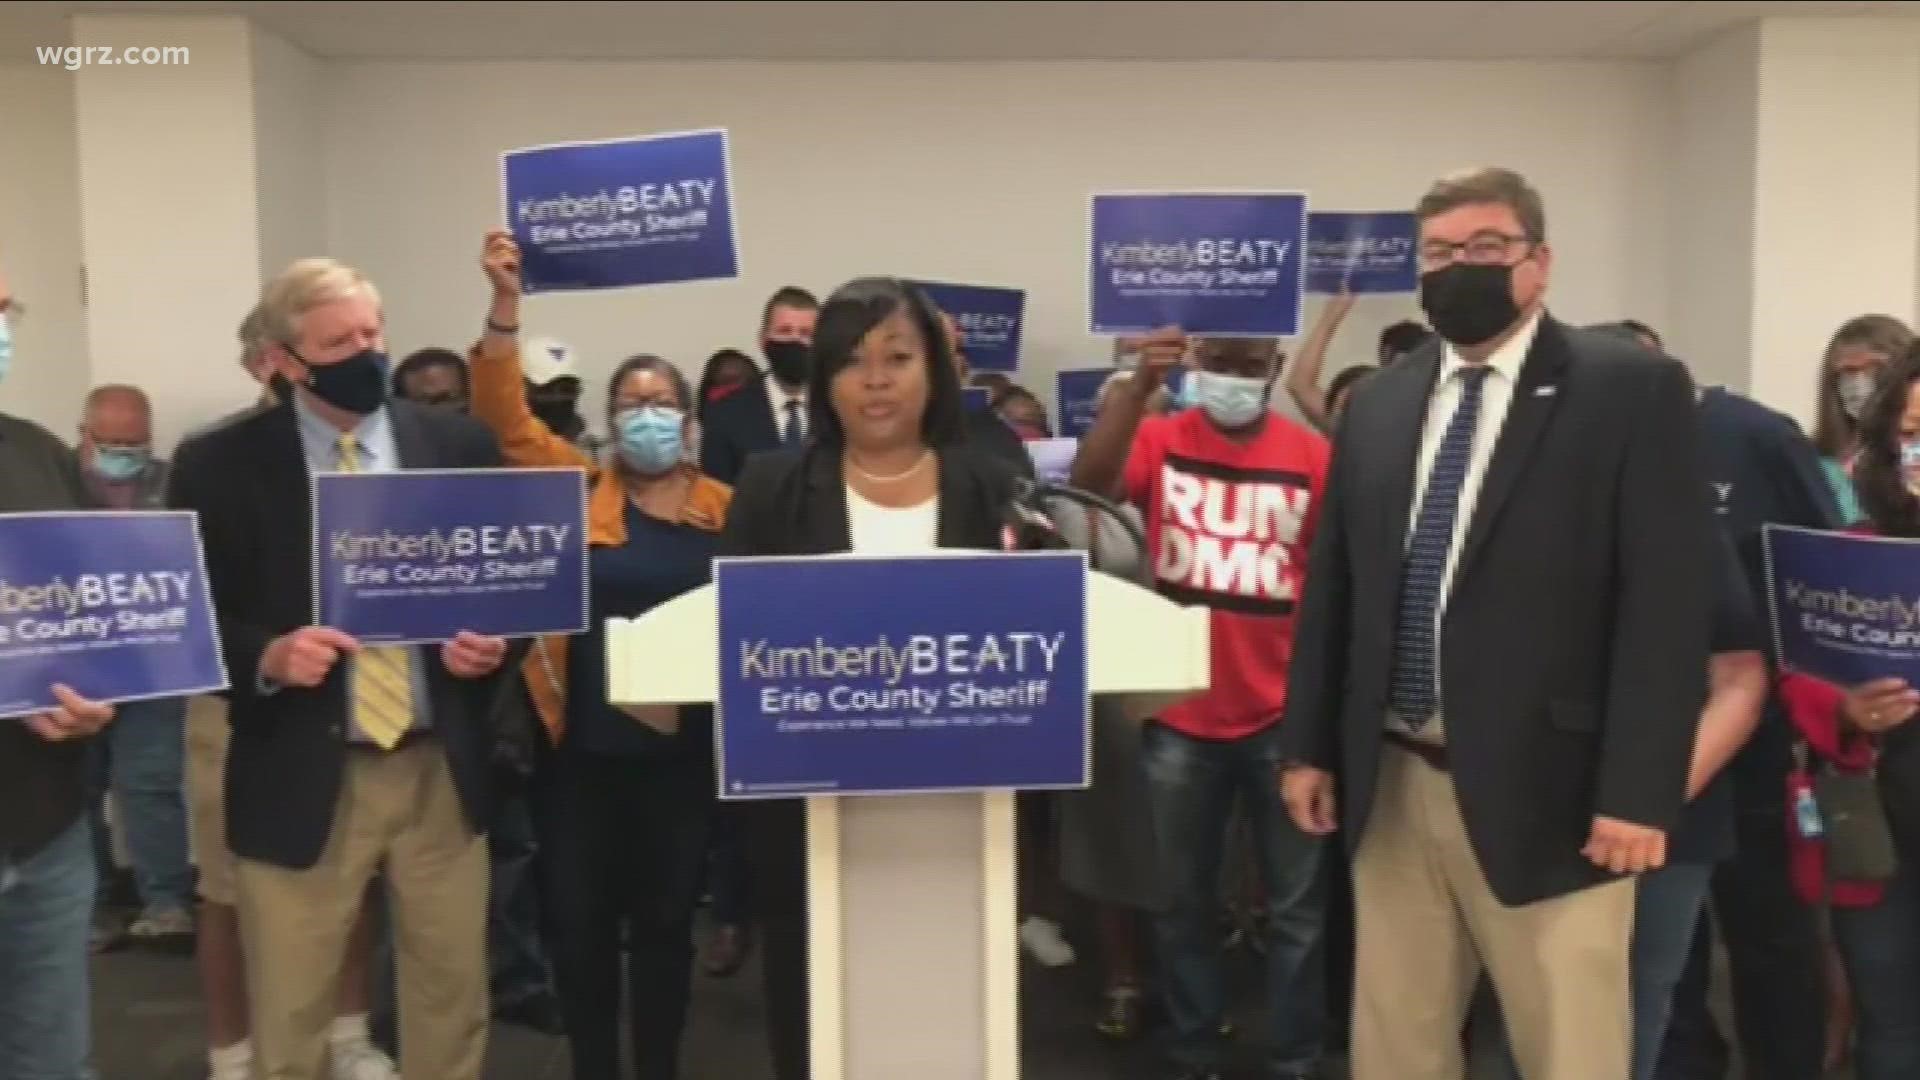 The Erie County Democratic Party endorsed Kim Beaty for sheriff.